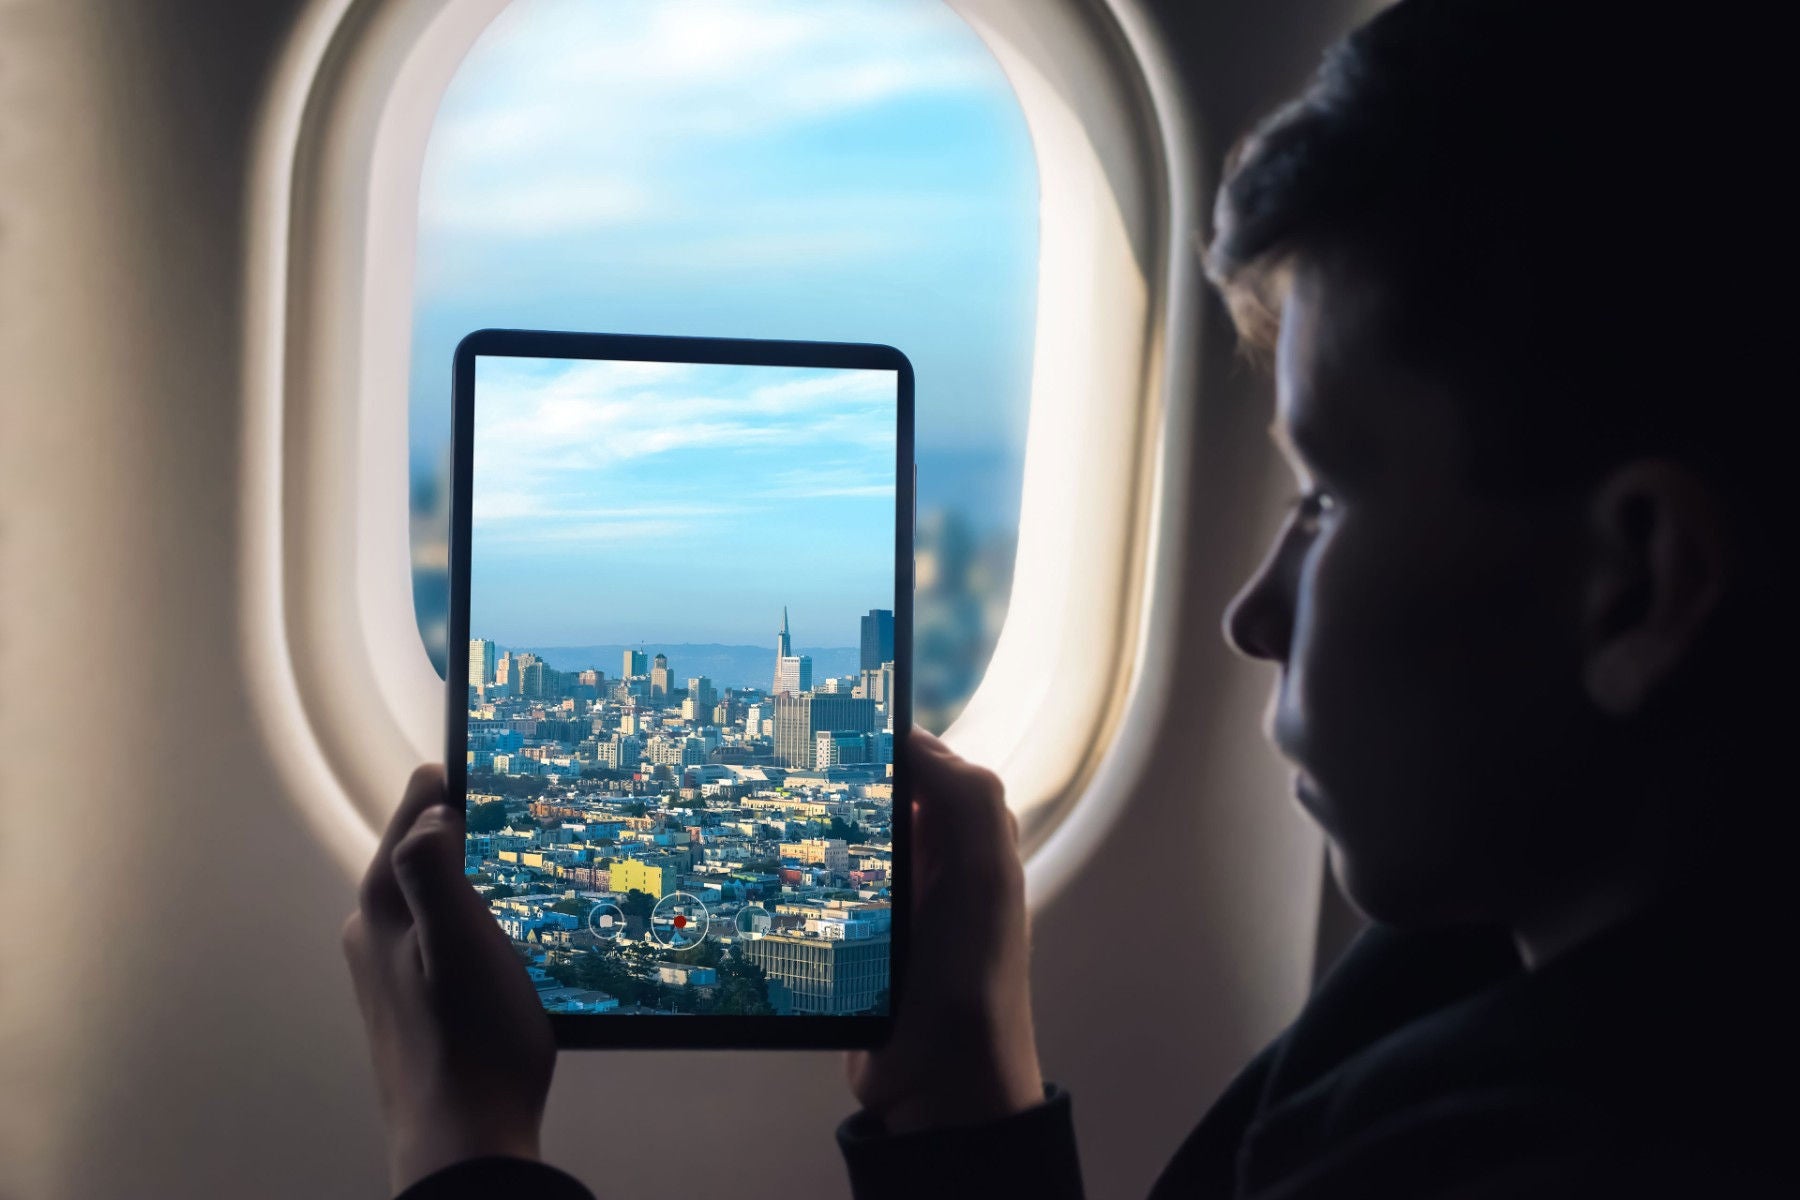 Boy taking picture on a tablet from inside of an airplane